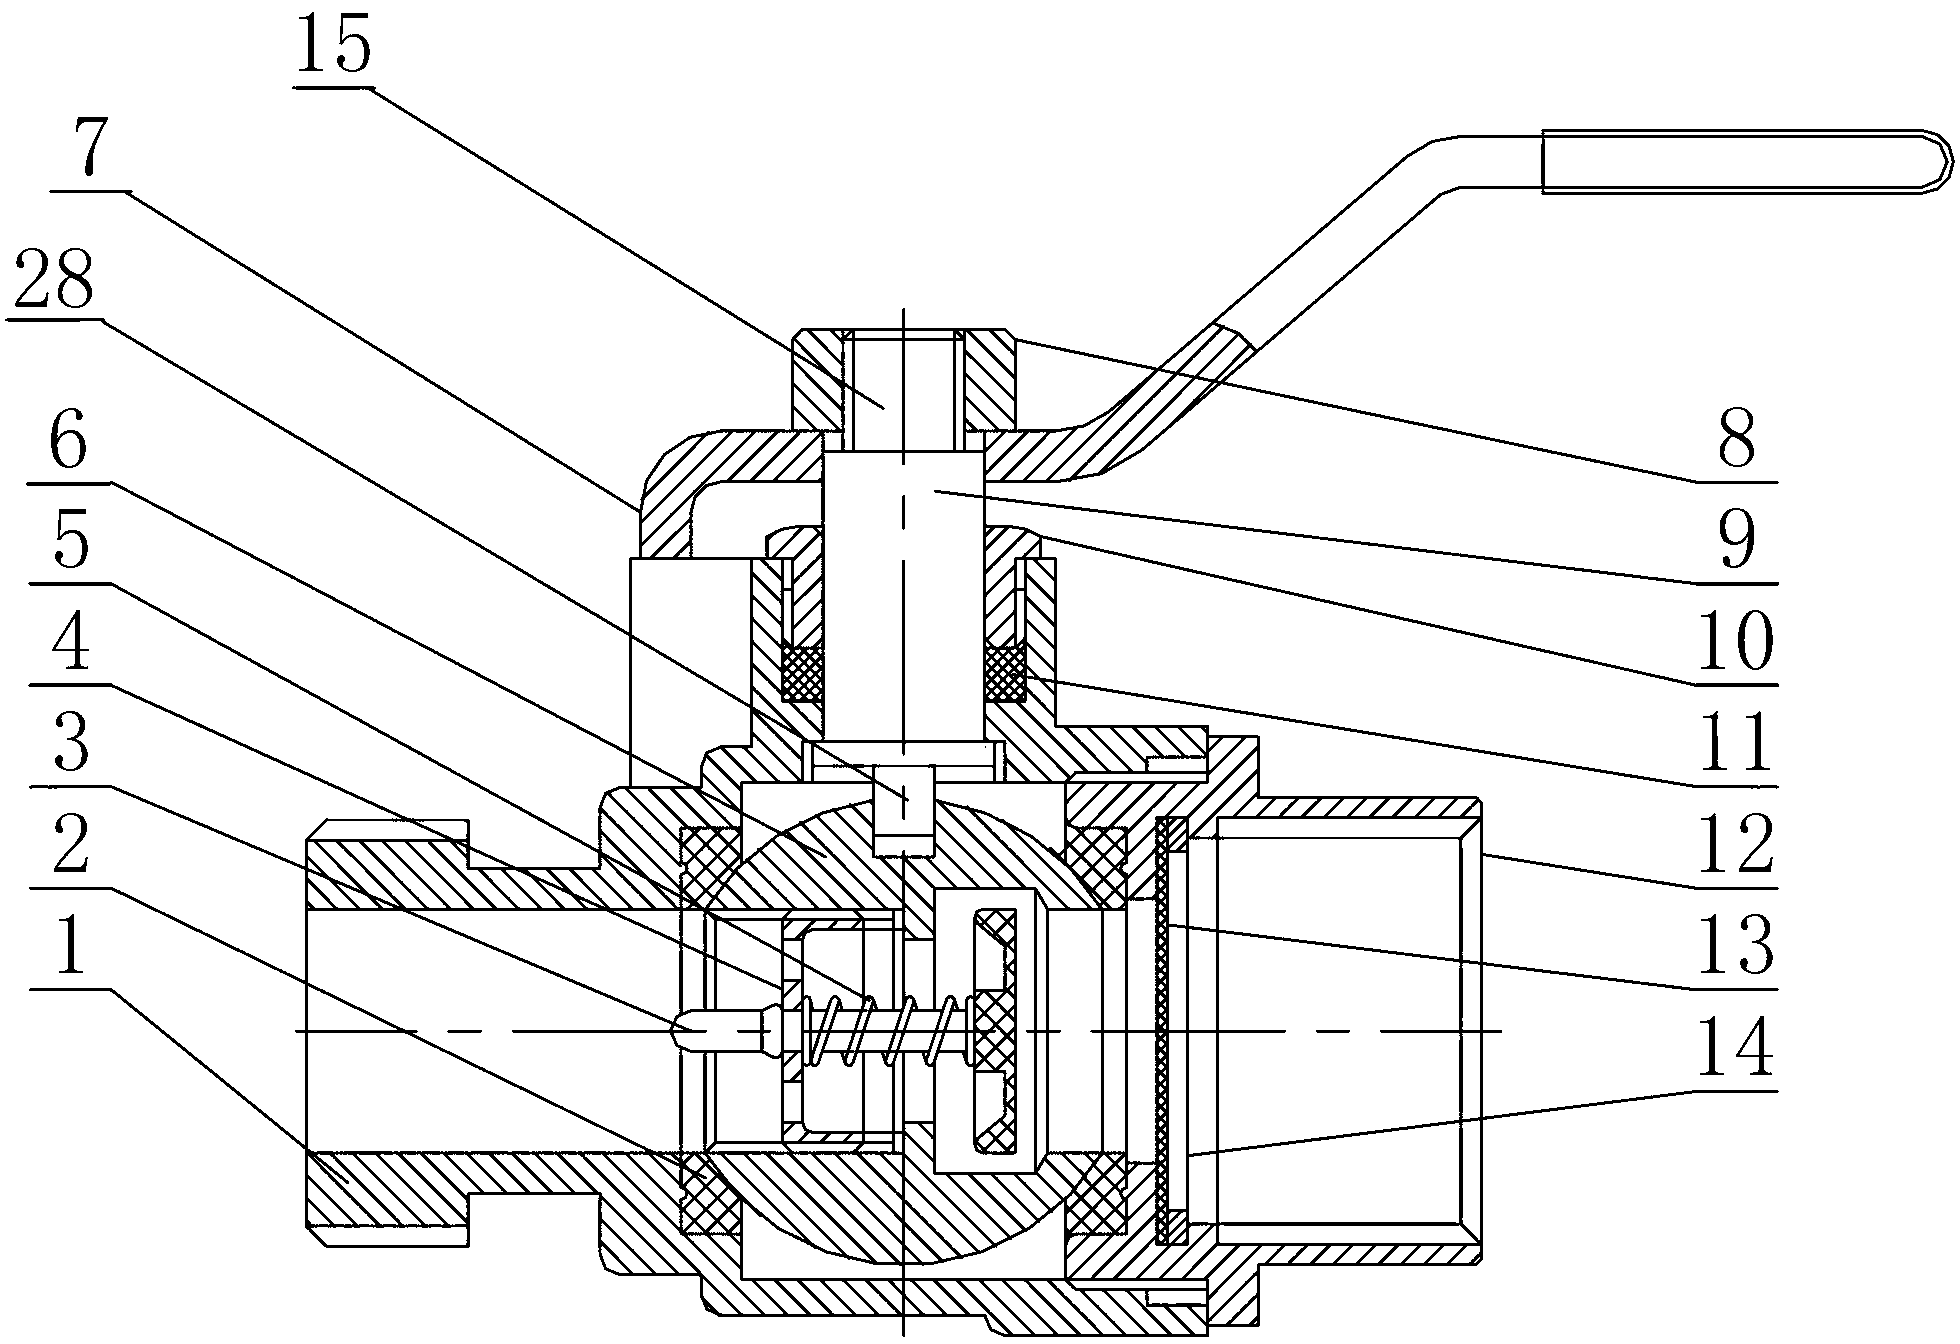 Gas ball valve capable of shutting down automatically under overpressure or overcurrent condition